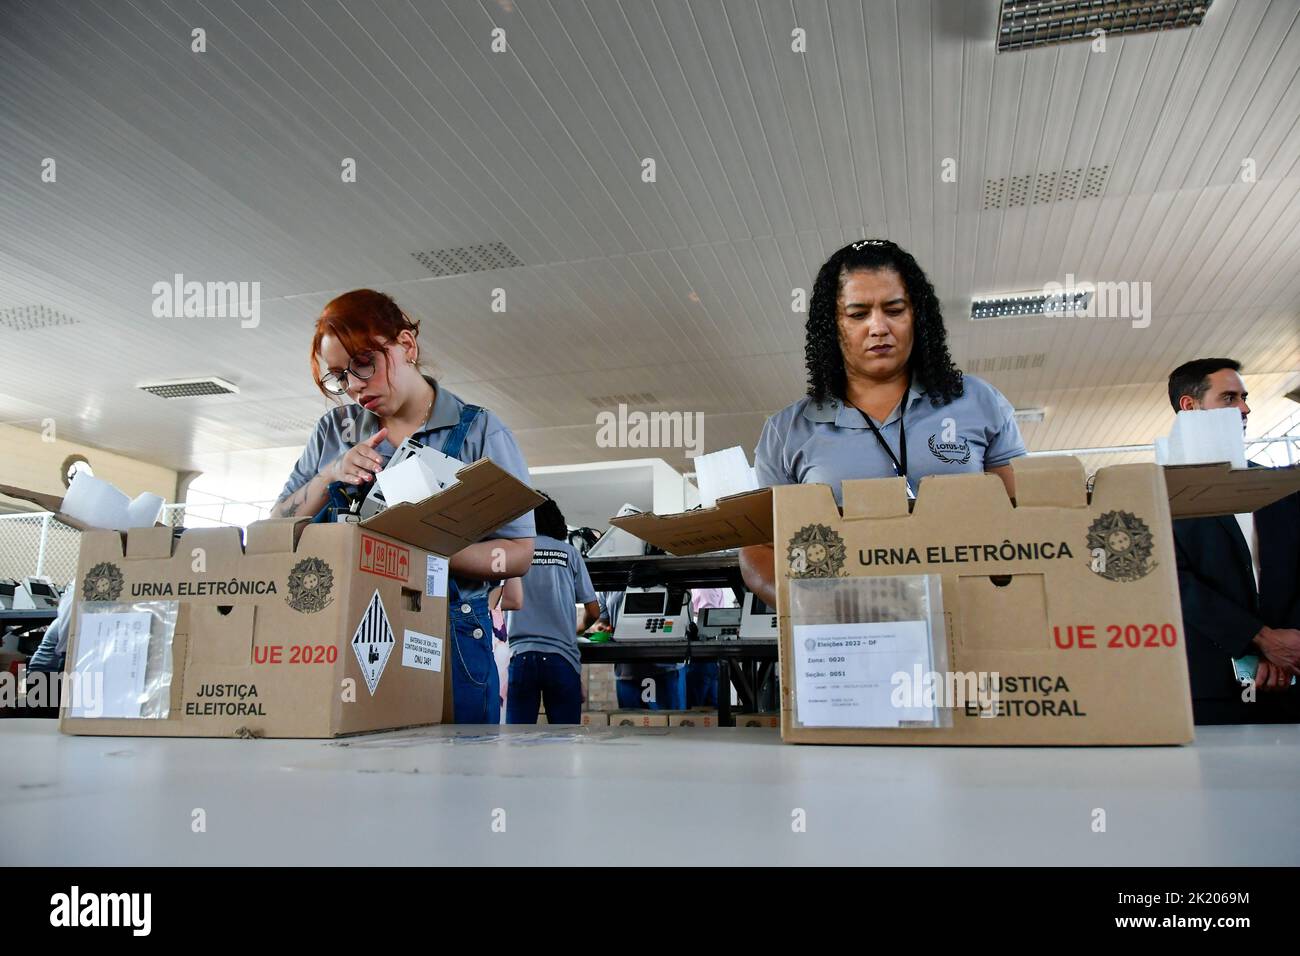 BRASÍLIA, DF - 21.09.2022: TRE REALIZA LACRAÇÃO DAS URNAS ELETRÔNICAS - Photo Employees of TRE DF checking and loading the box with an electronic ballot box. This Wednesday (21) the TRE of the Federal District began the process of sealing and putting in boxes the electronic ballot boxes to distribute in the region's elections. (Photo: Ton Molina/Fotoarena) Stock Photo